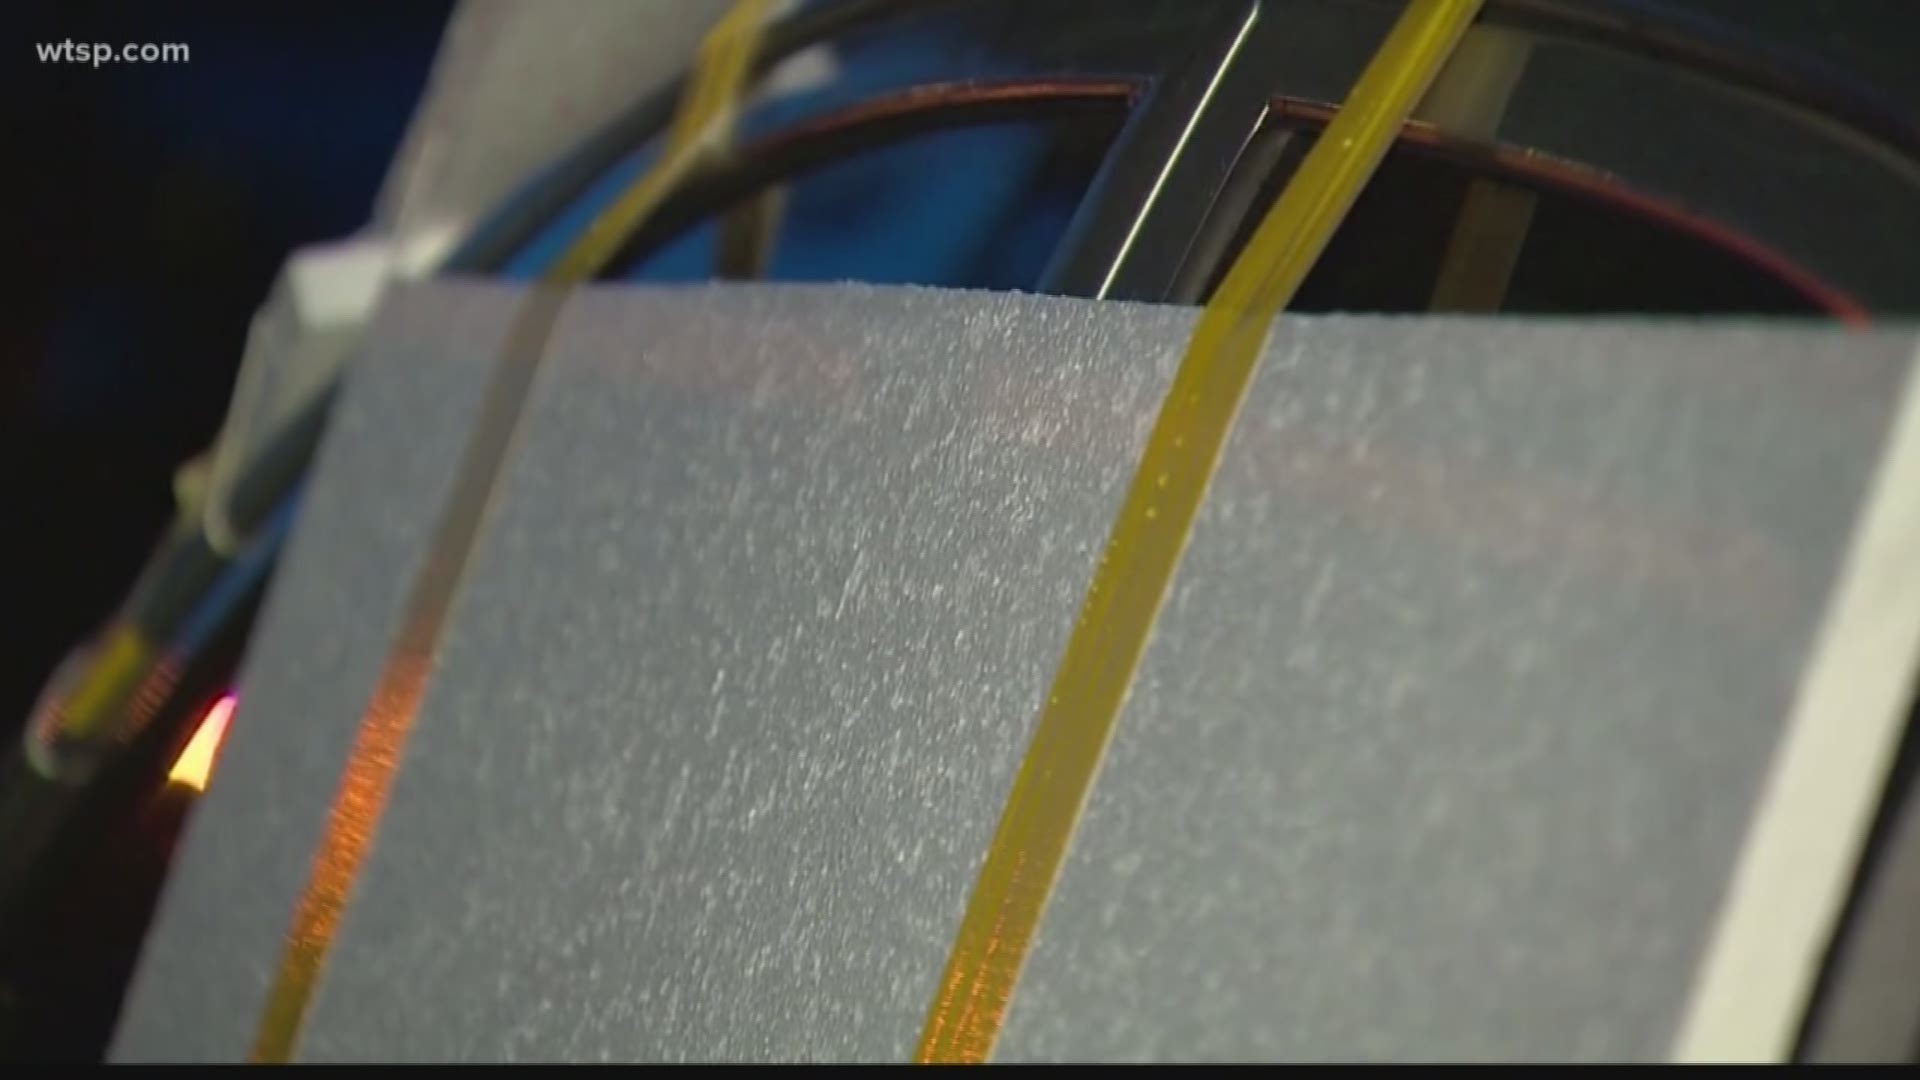 Could blankets and cardboard protect your windshield from hail damage? We find out.